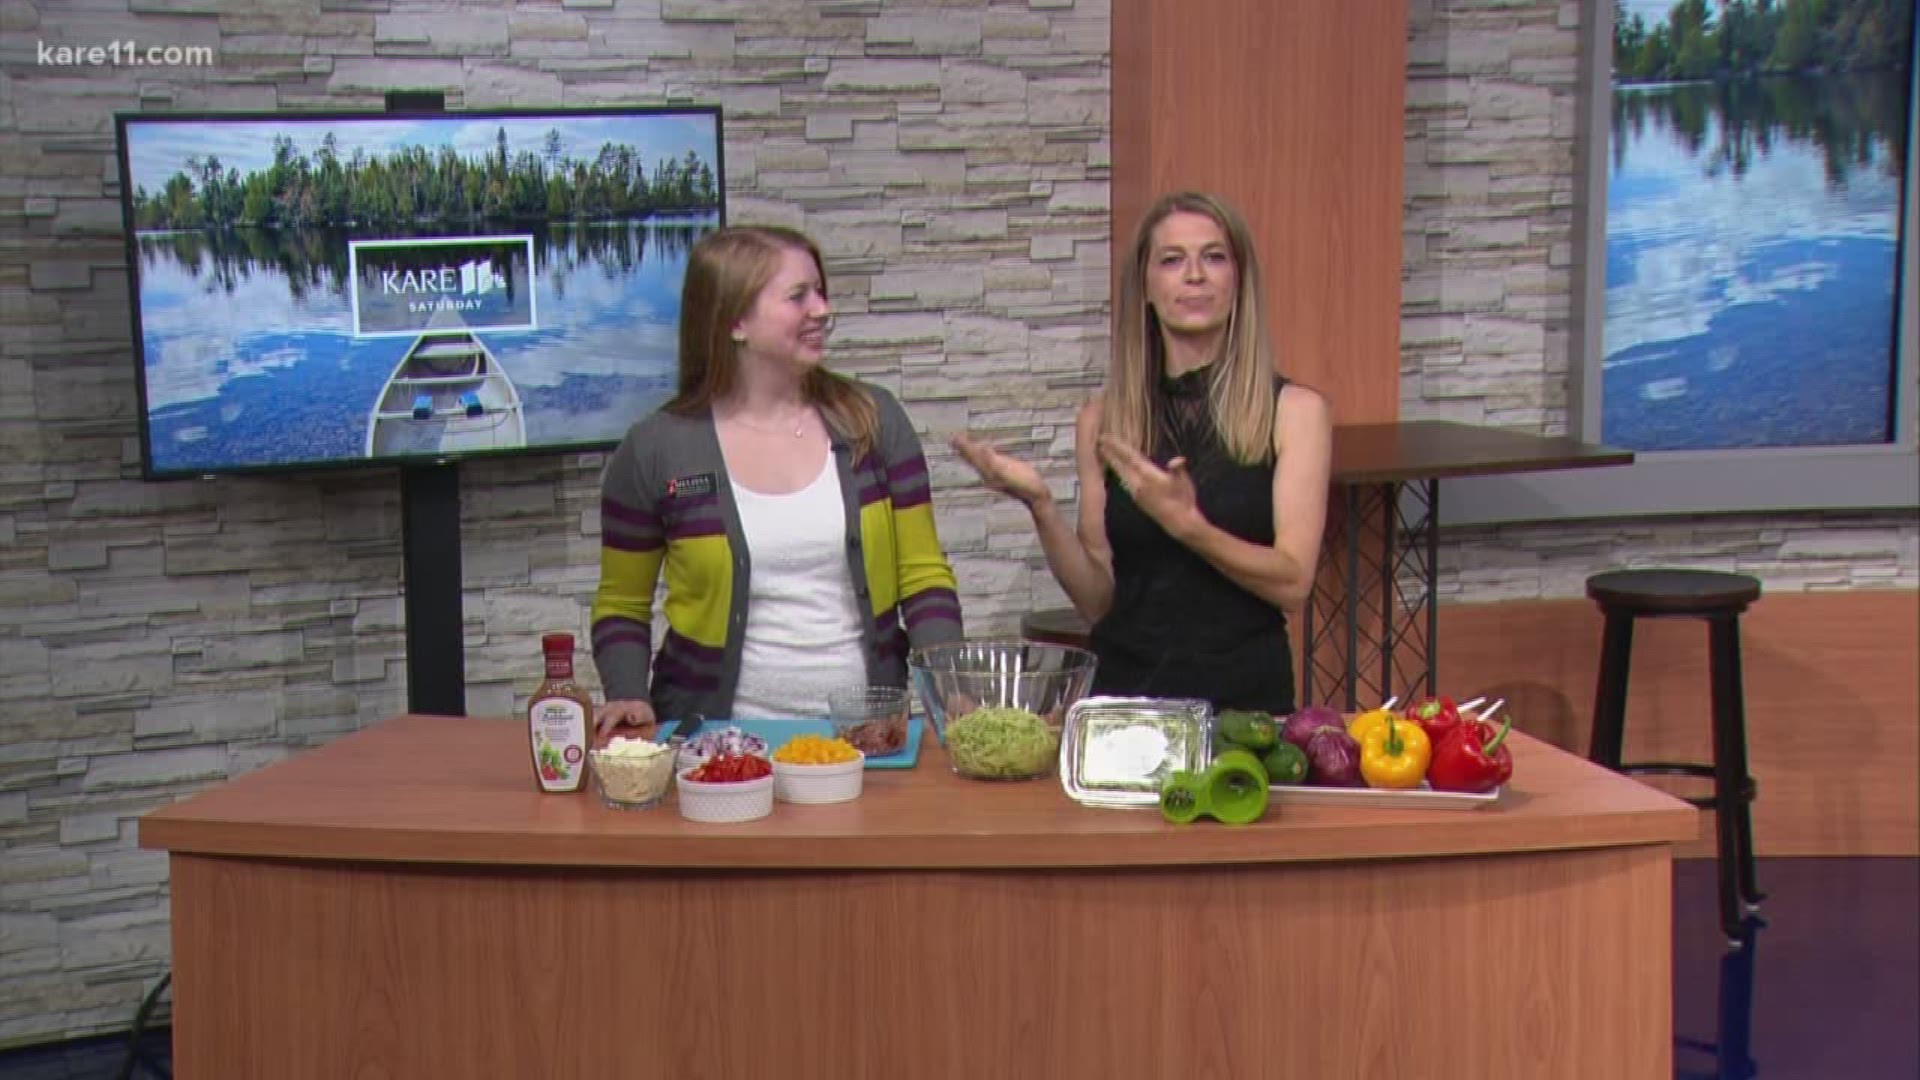 Melissa Bradley from Hy-Vee joined Laura Betker this morning to discuss a healthy alternative to pasta salad. Instead of using pasta, try using veggie noodles! Using spiraled vegetables as an alternative can supply you with the vitamins and minerals you n